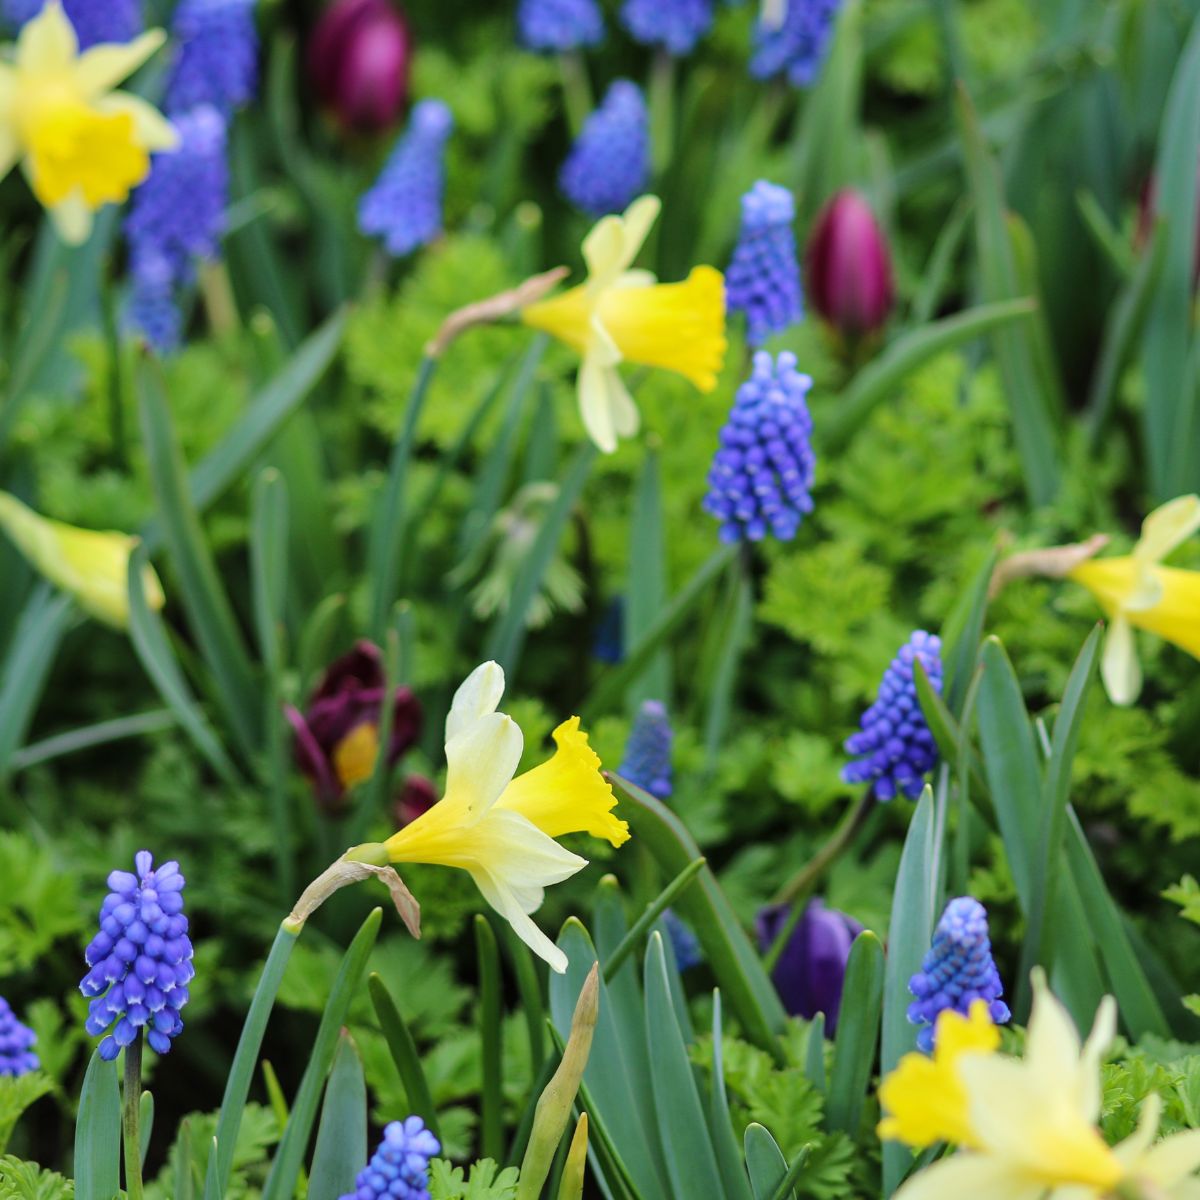 daffodils and grape hyacinth in the garden